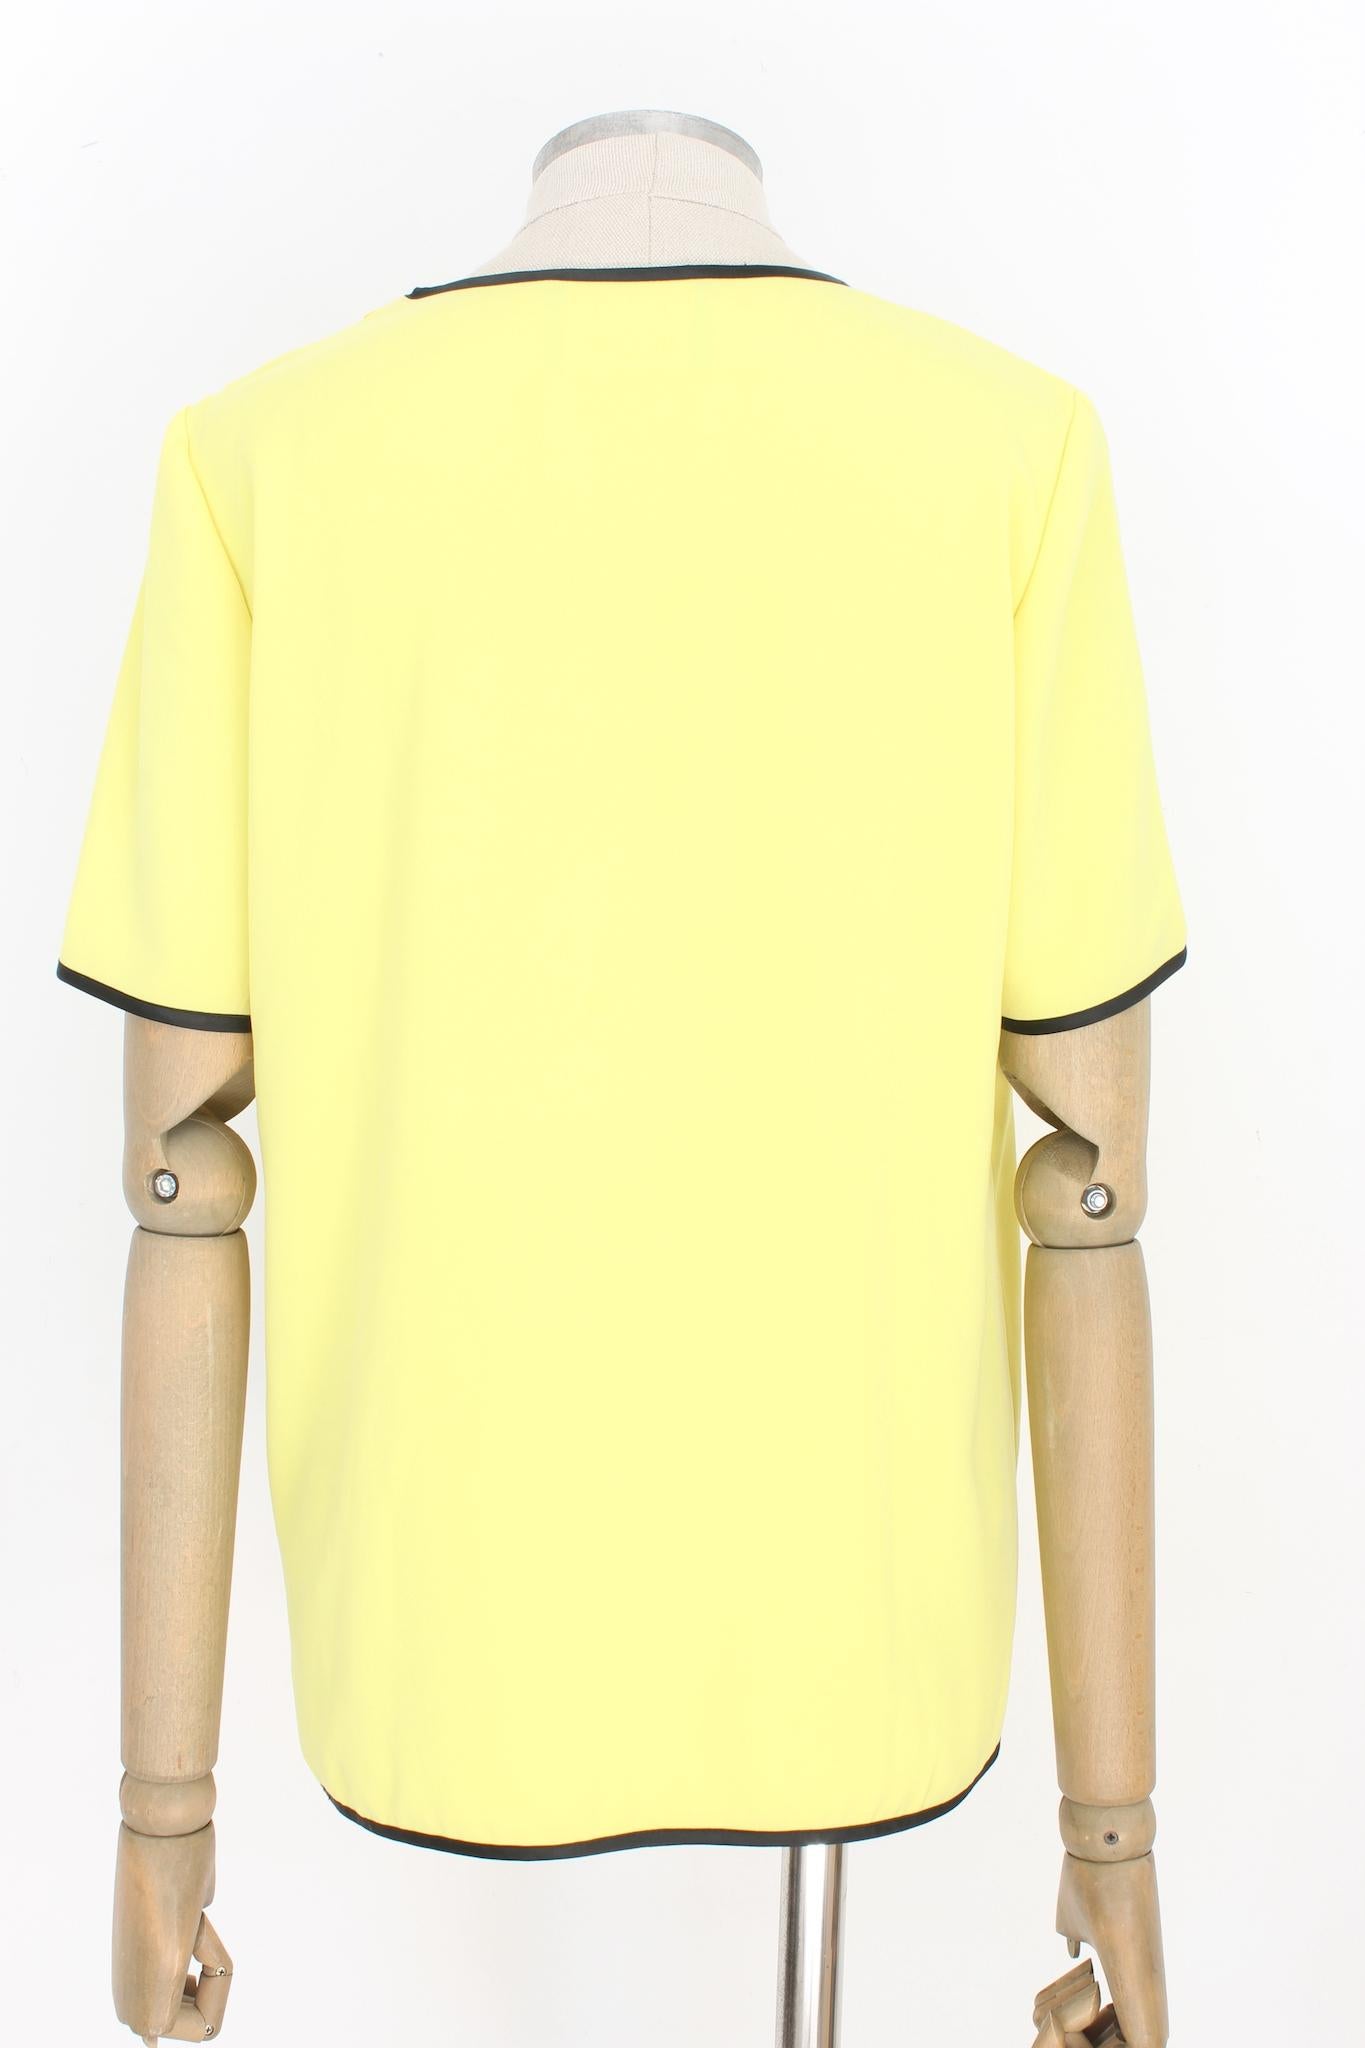 Moschino Couture classic 2000s t-shirt. Soft shirt, yellow with colored hearts printed. Zipper closure on the shoulder. 95% polyester fabric, 5% other fibers.

Size: 42 It 8 Us 10 Uk

Shoulder: 42cm
Bust/Chest: 49 cm
Sleeve: 22 cm
Length: 61 cm